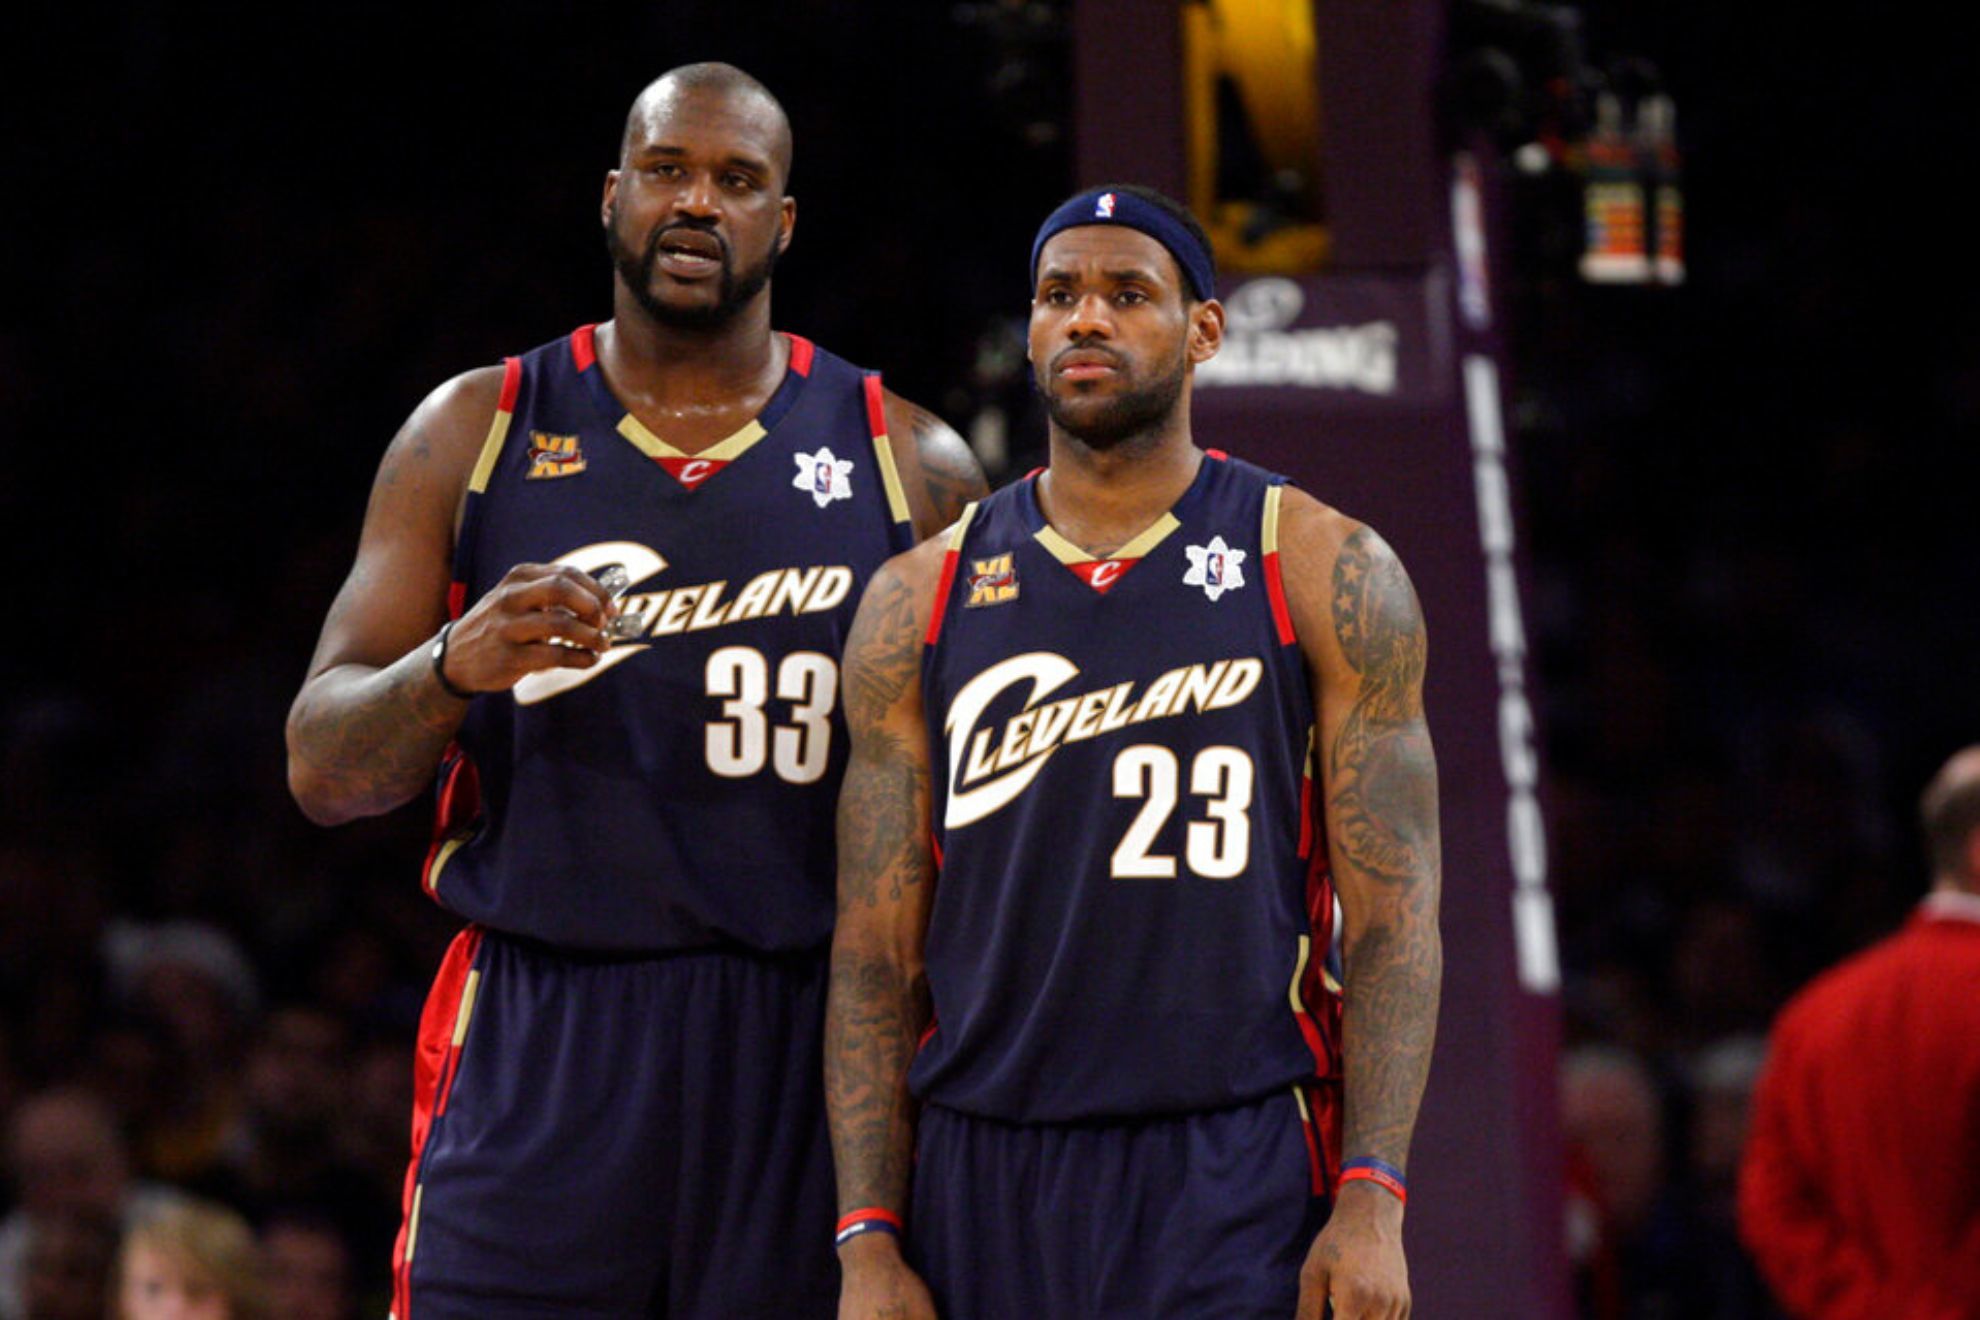 Shaq shared the court with a young James during his time in Cleveland